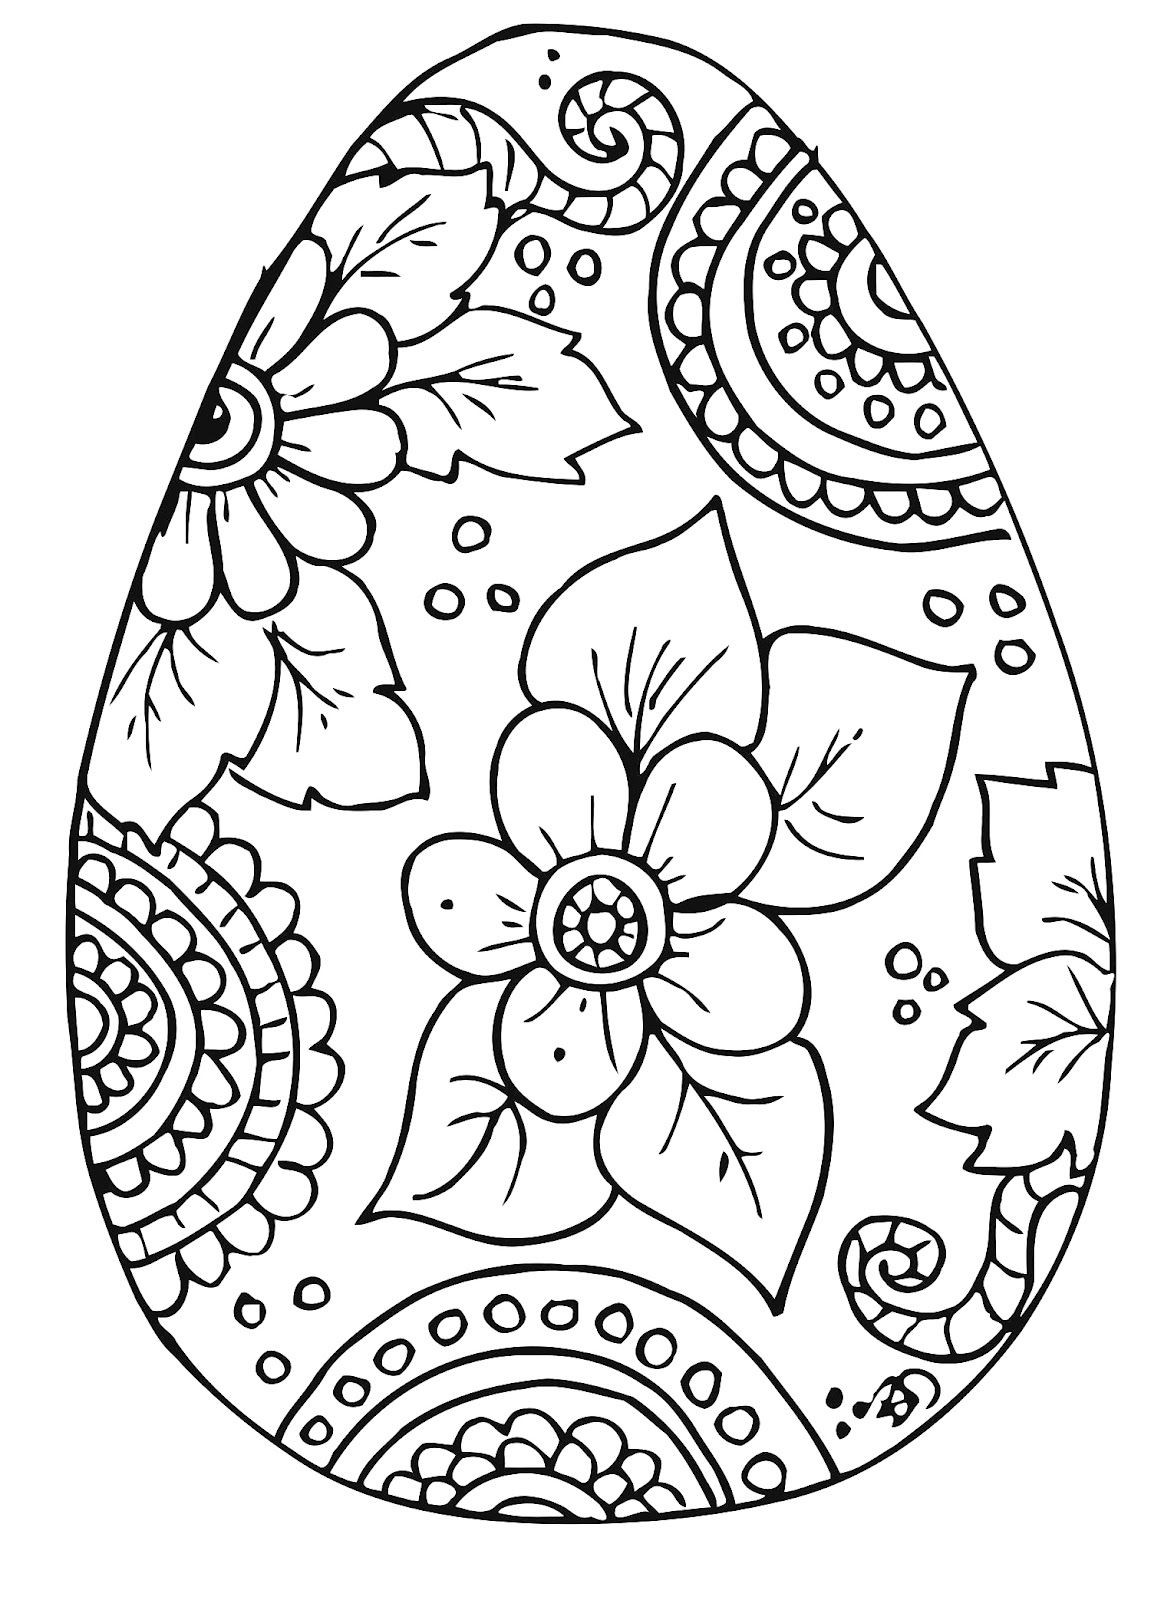 Printable Coloring Pages For Easter
 10 cool free printable Easter coloring pages for kids who